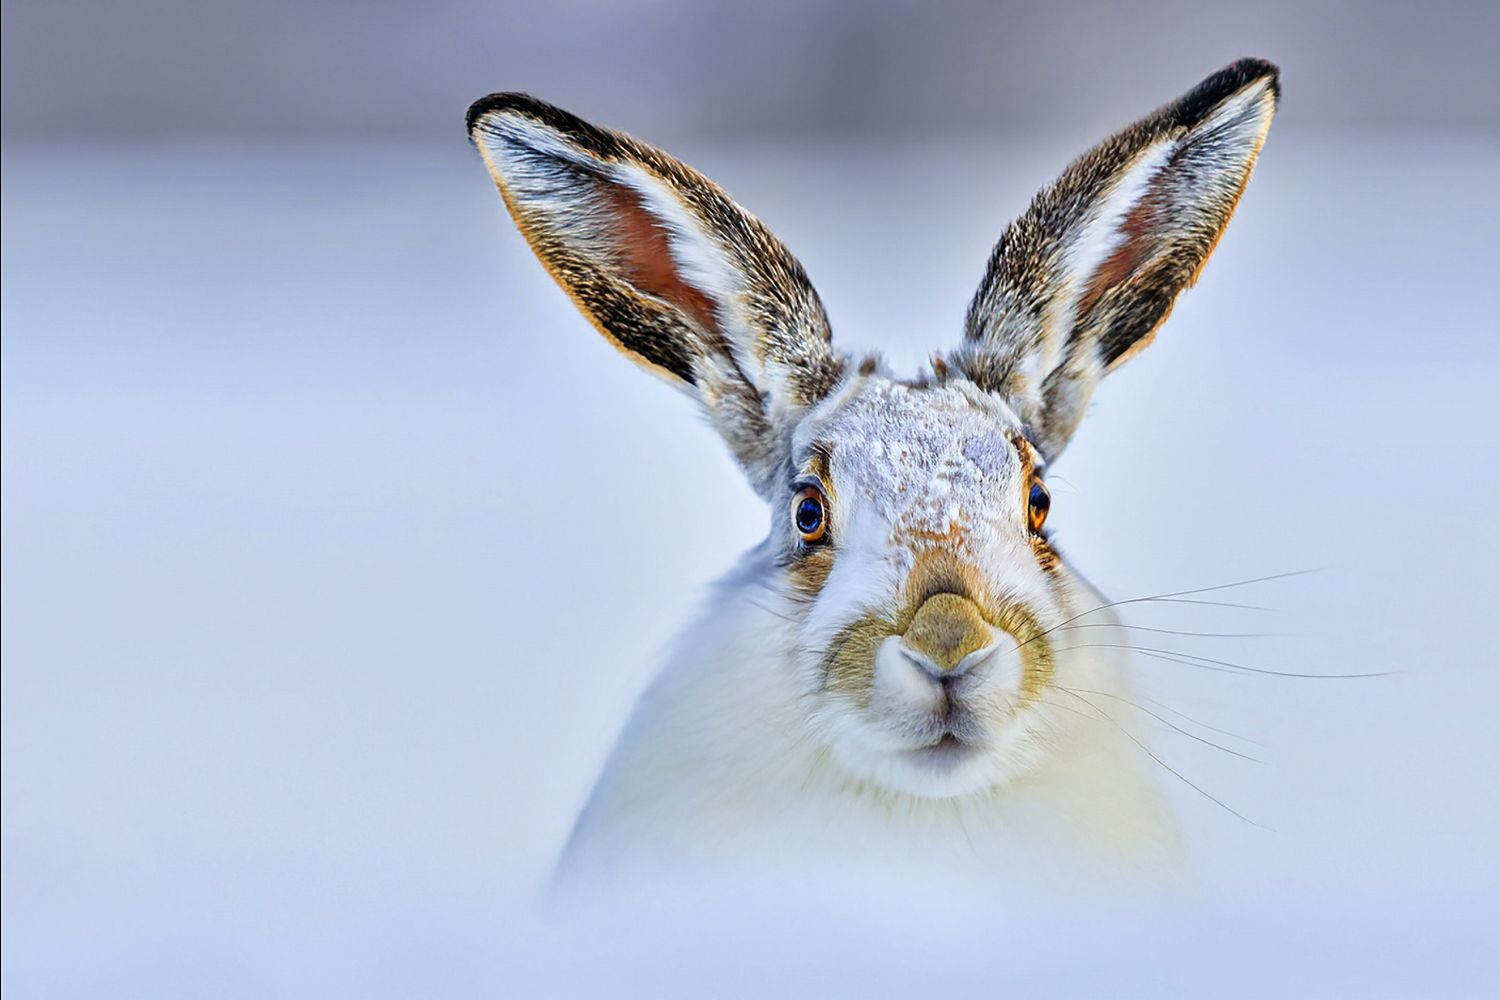  A White Hare by Martin Lawrence Photography